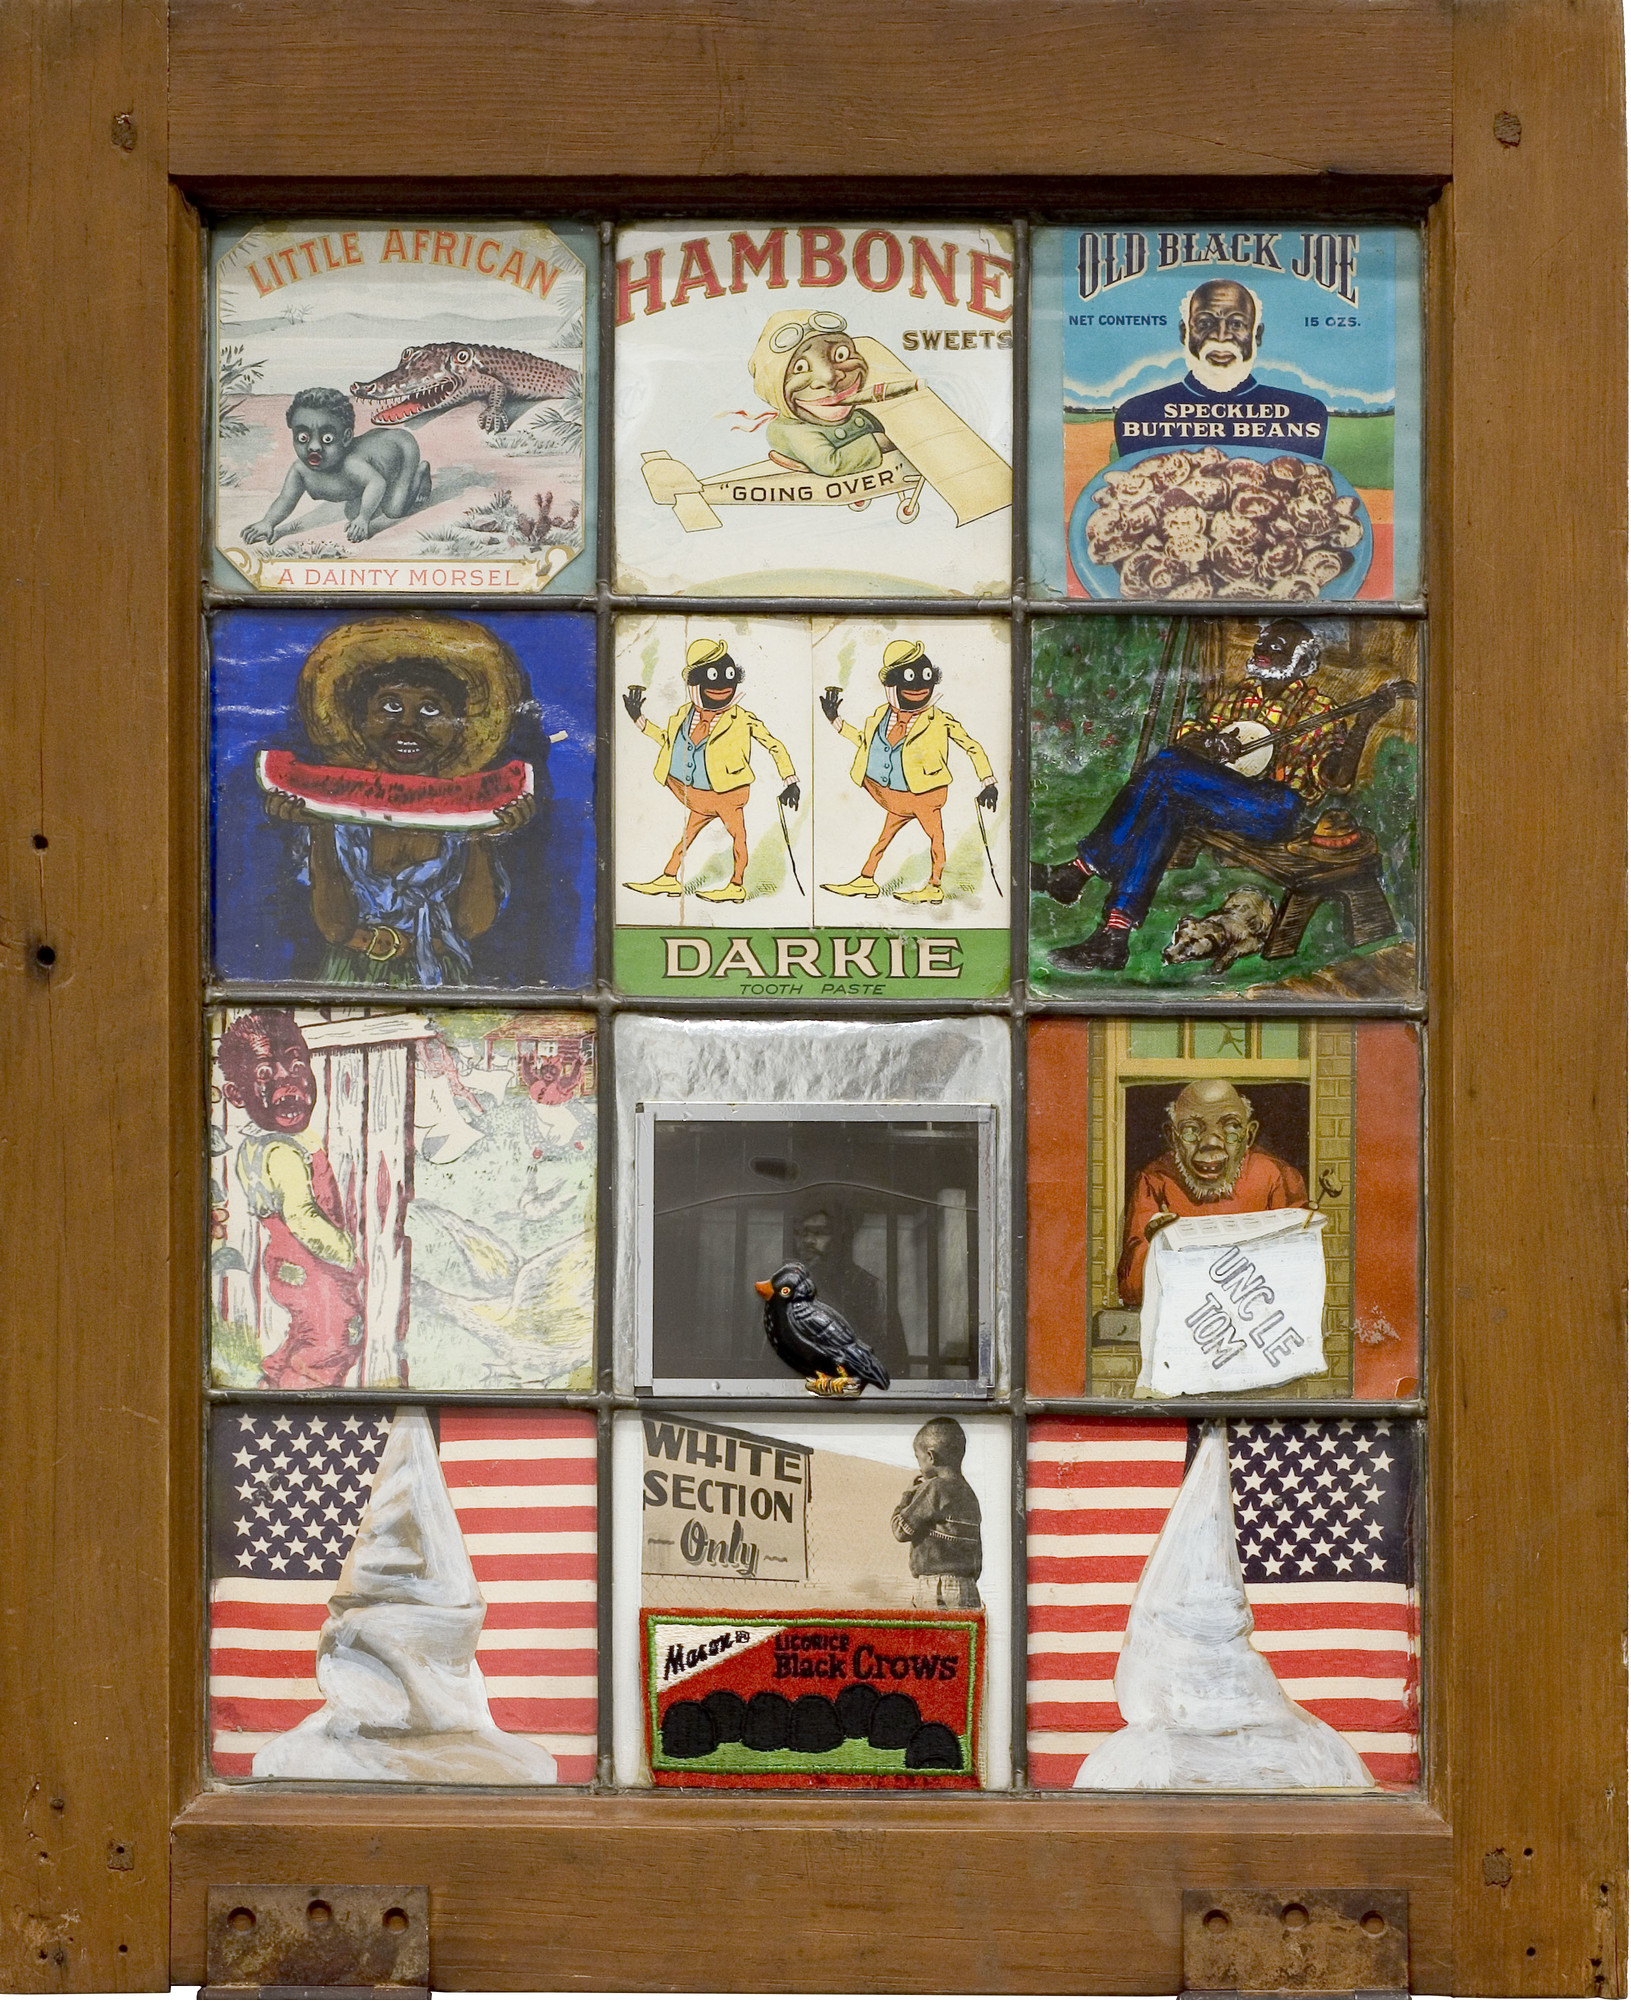 Betye Saar. _Black Crows in the White Section Only_. 1972. Assemblage with glass negative, found printed paper, found metal object, gouache on paper and fabric in wood and glass window frame, 22 × 18 × 1 3/4" (55.9 × 45.7 × 4.4 cm). Collection halley k harrisburg and Michael Rosenfeld, New York. © 2019 Betye Saar, courtesy of the artist and Roberts Projects, Los Angeles. Image courtesy of Michael Rosenfeld Gallery LLC, New York, NY.